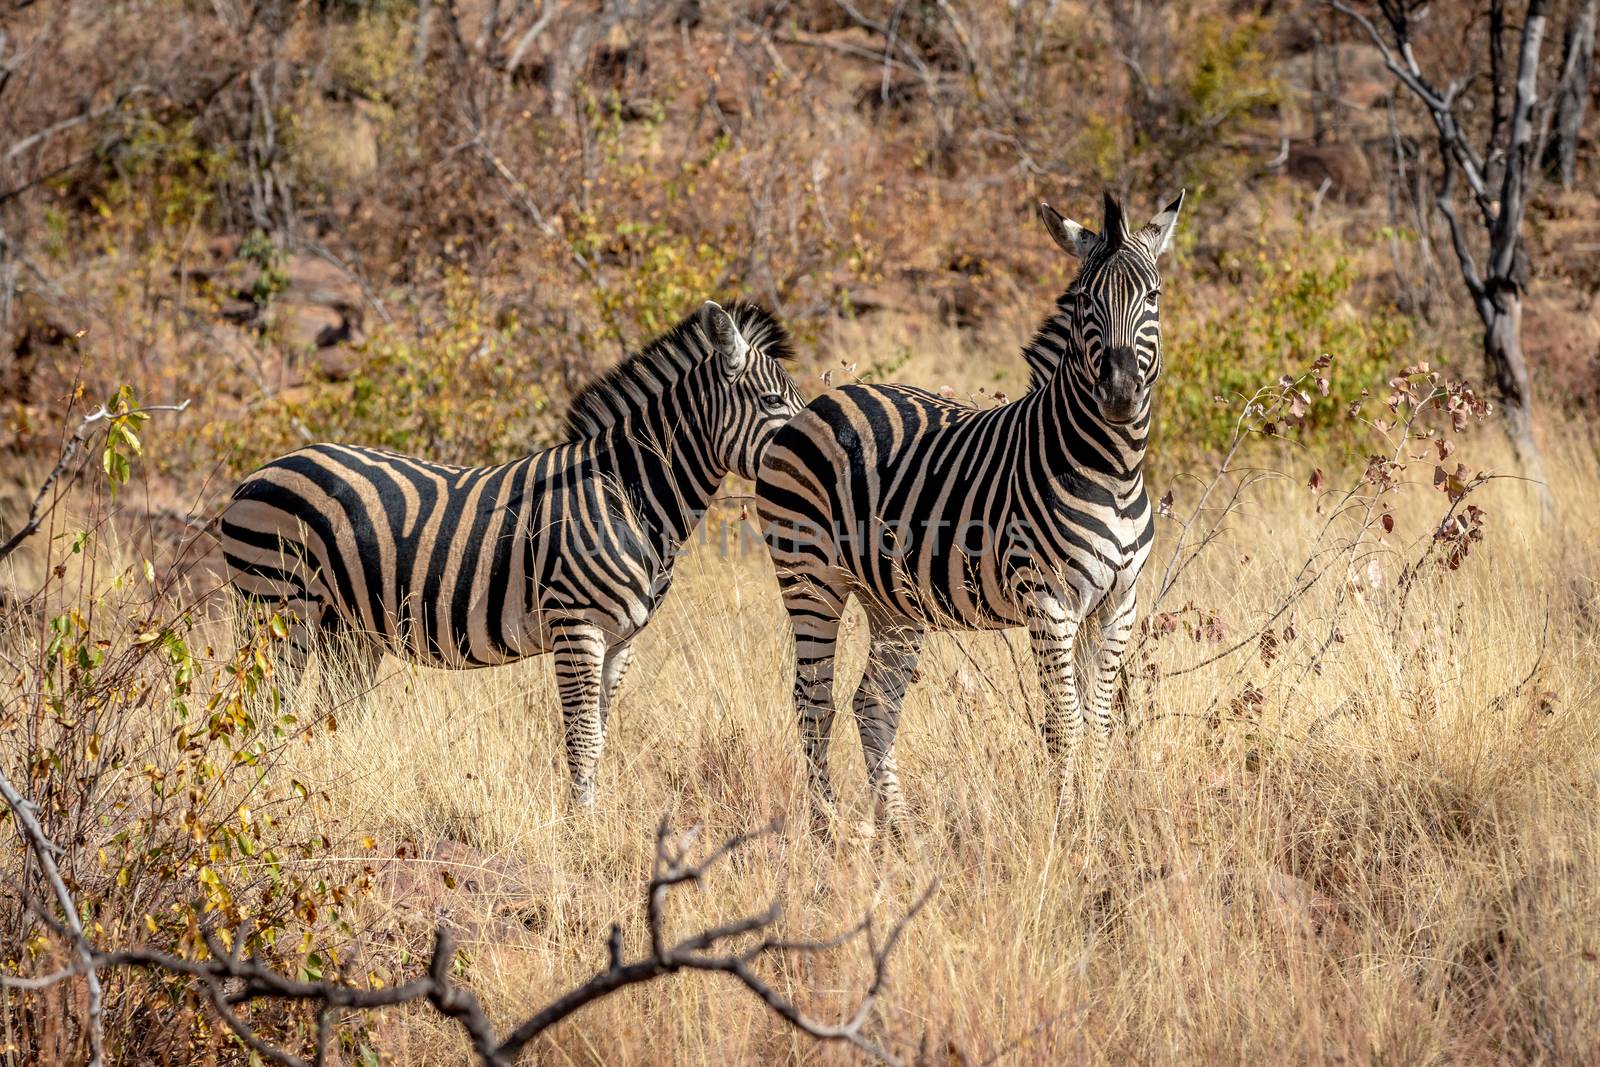 Two Zebras standing in the grass. by Simoneemanphotography